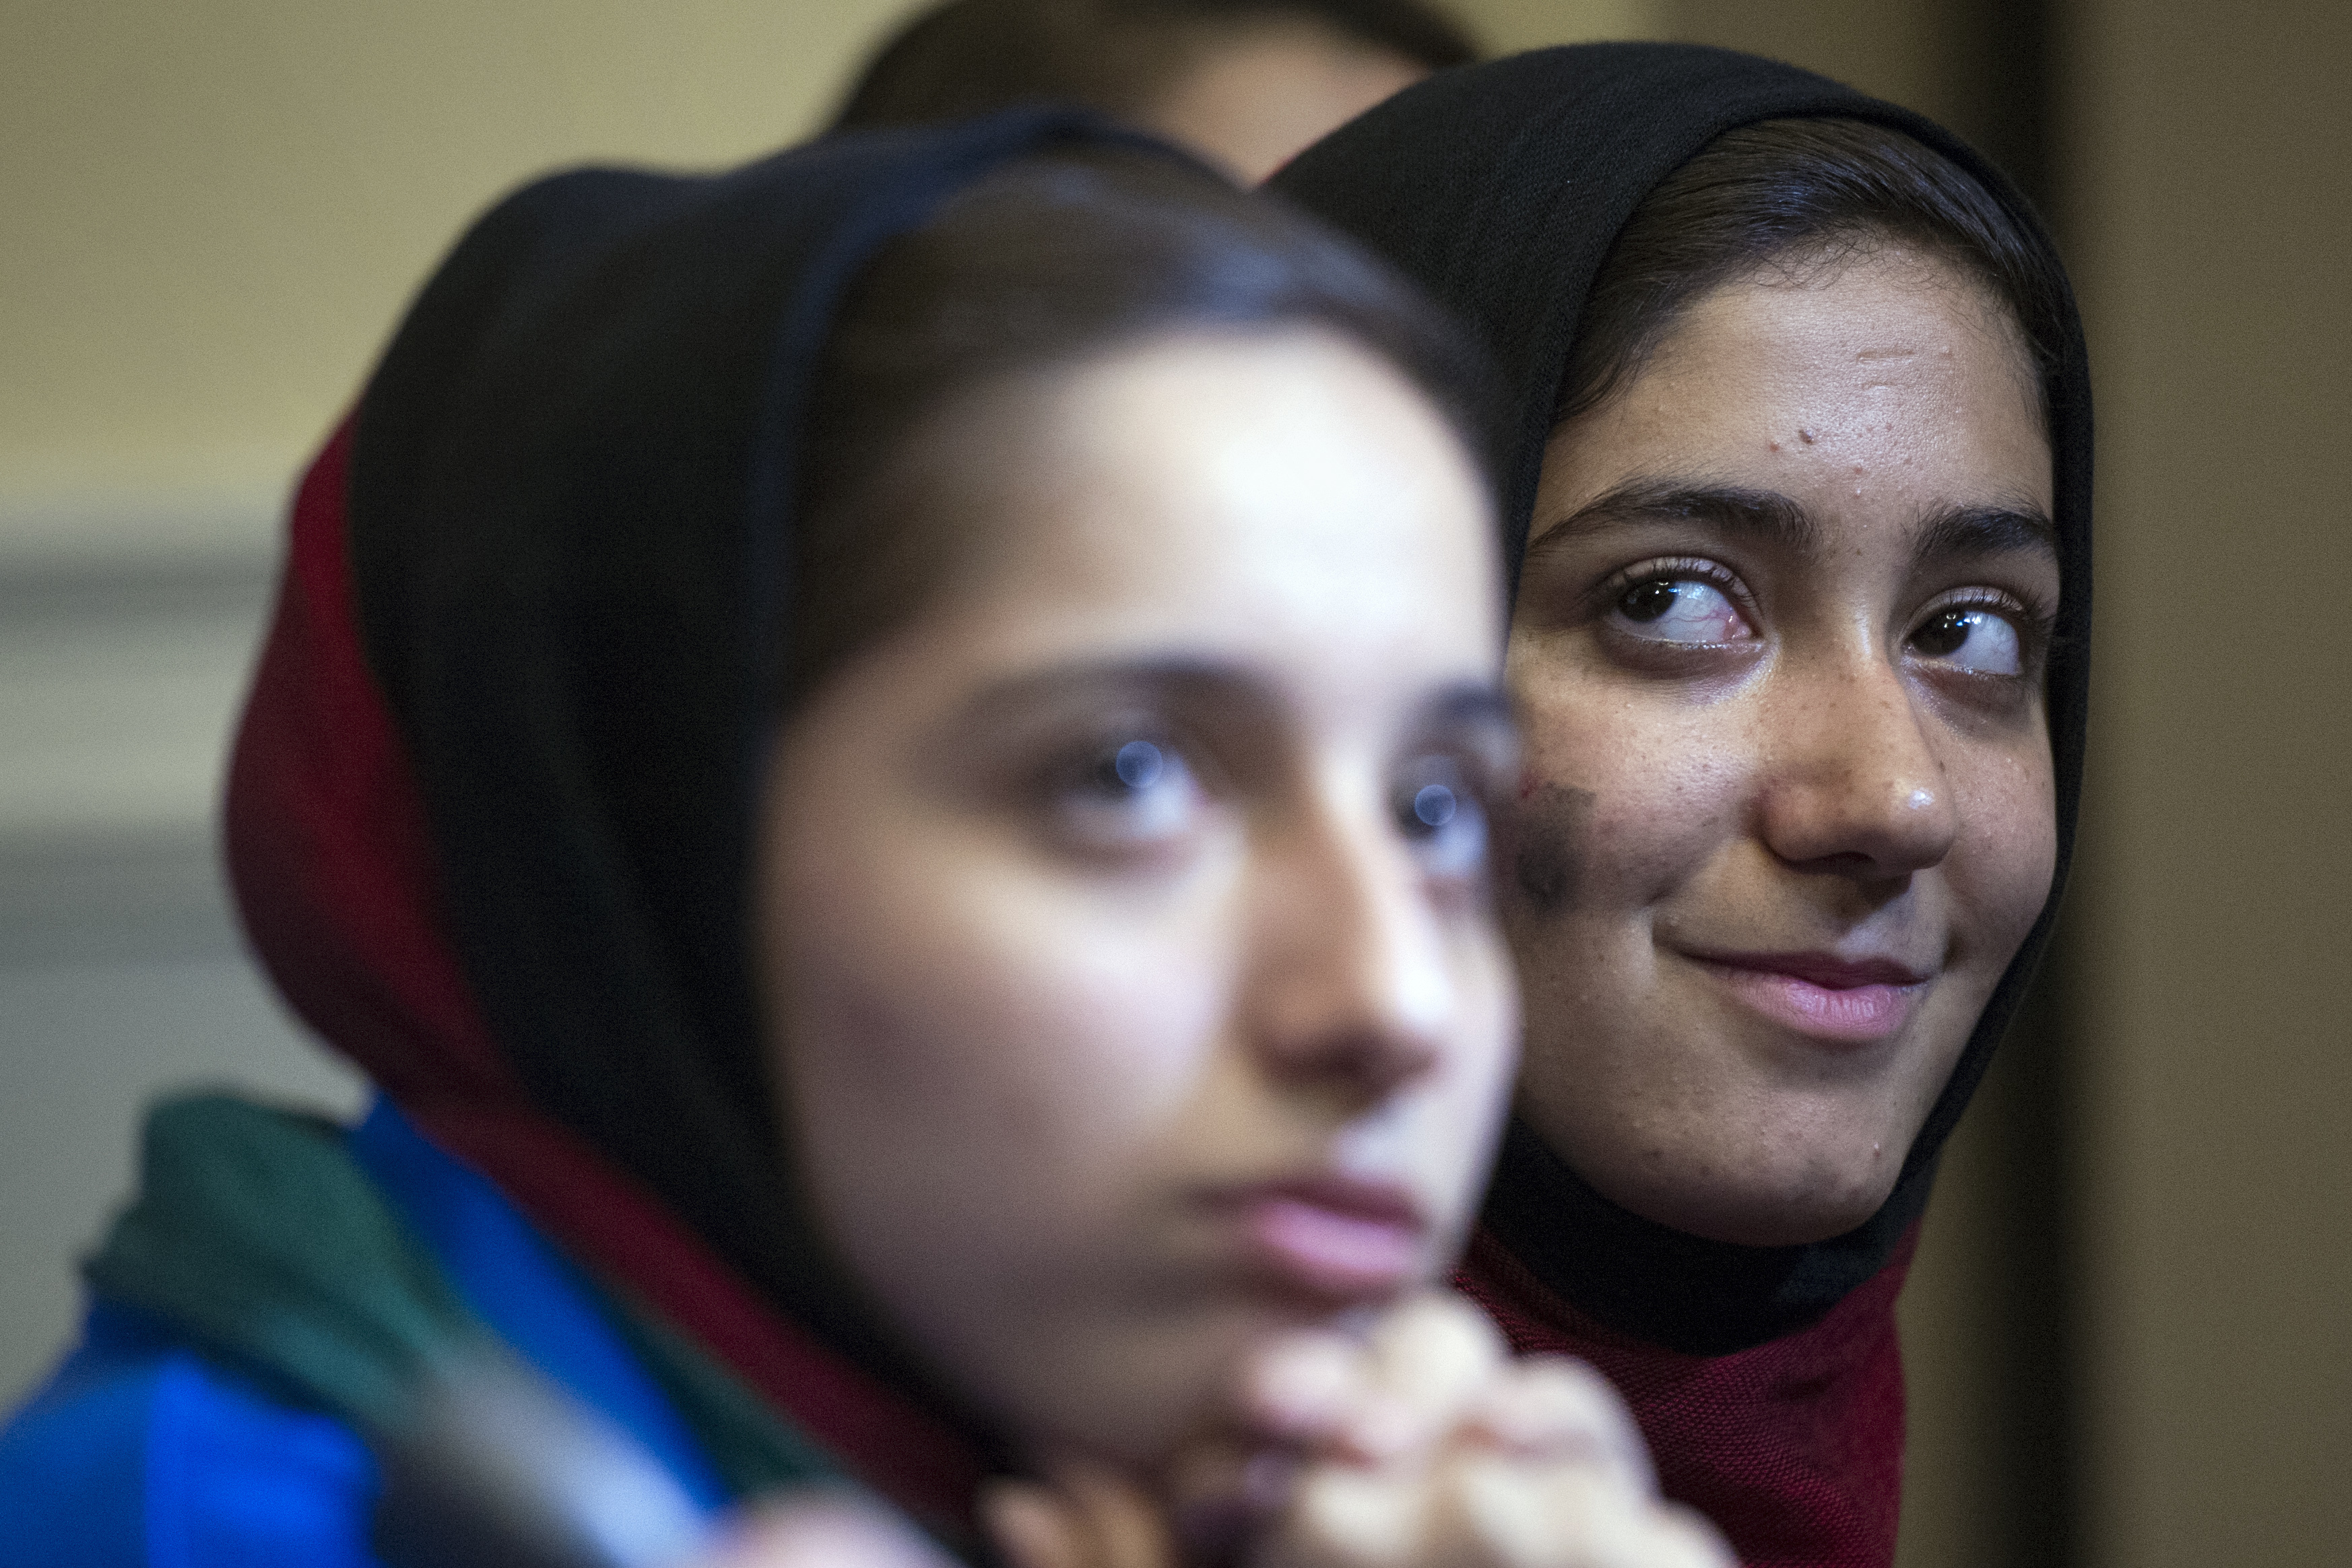 Afghanistan's FIRST Global Challenge team member Fatemah Qaderyan, left, and Rodaba Noori meet with reporters following the opening ceremony in Washington, Sunday, July 16, 2017. Twice rejected for U.S. visas, the all-girls robotics team arrived in Washington on Saturday and will compete against entrants from more than 150 countries in the three-day high school competition. It's the first annual robotics competition designed to encourage youths to pursue careers in math and science. (AP Photo/Cliff Owen)